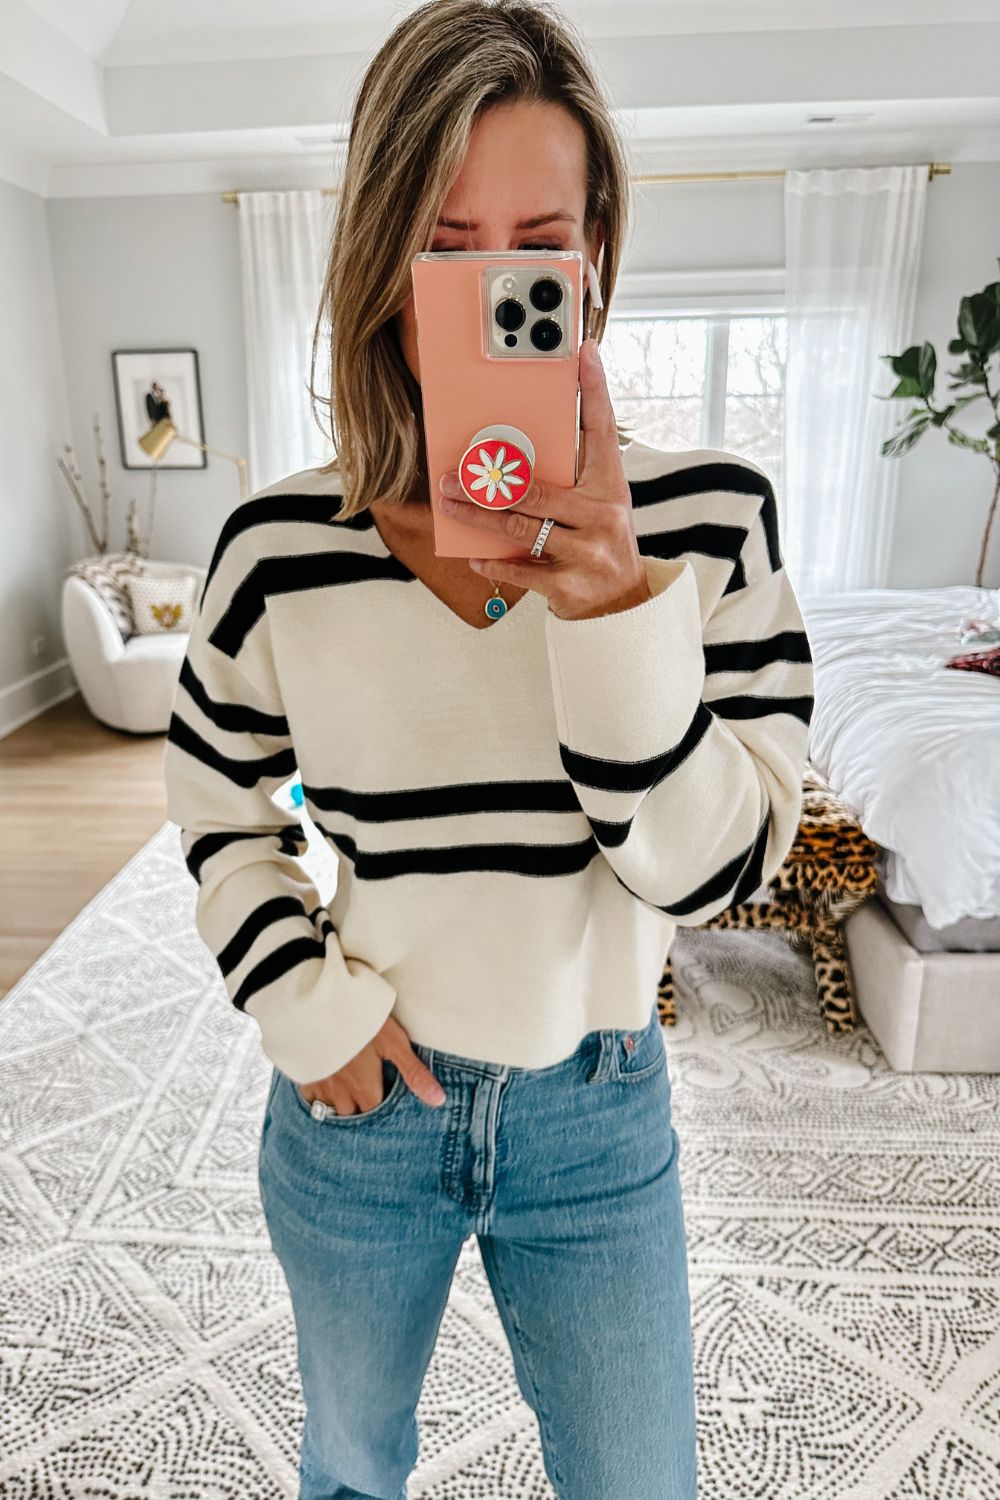 Suzanne wearing a striped sweater from Evereve